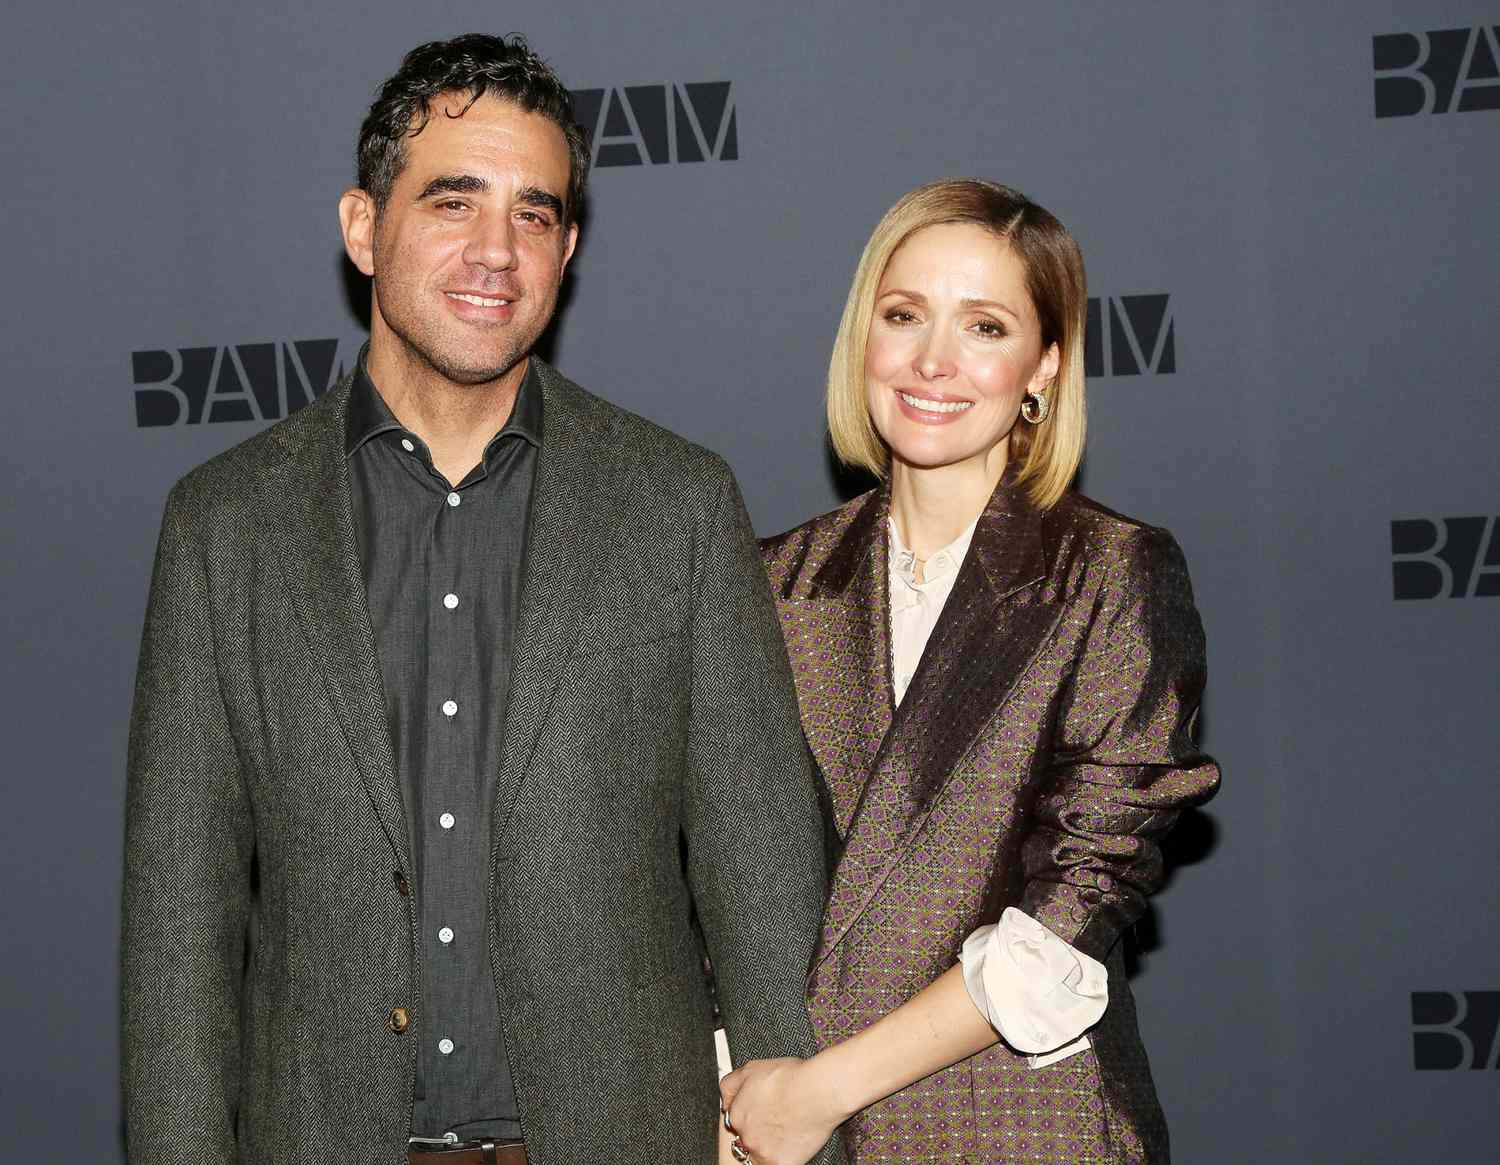 Bobby Cannavale and Rose Byrne pose at a photo call for the upcoming production of "Medea" at BAM on December 10, 2019 in The Brooklyn Borough of New York City